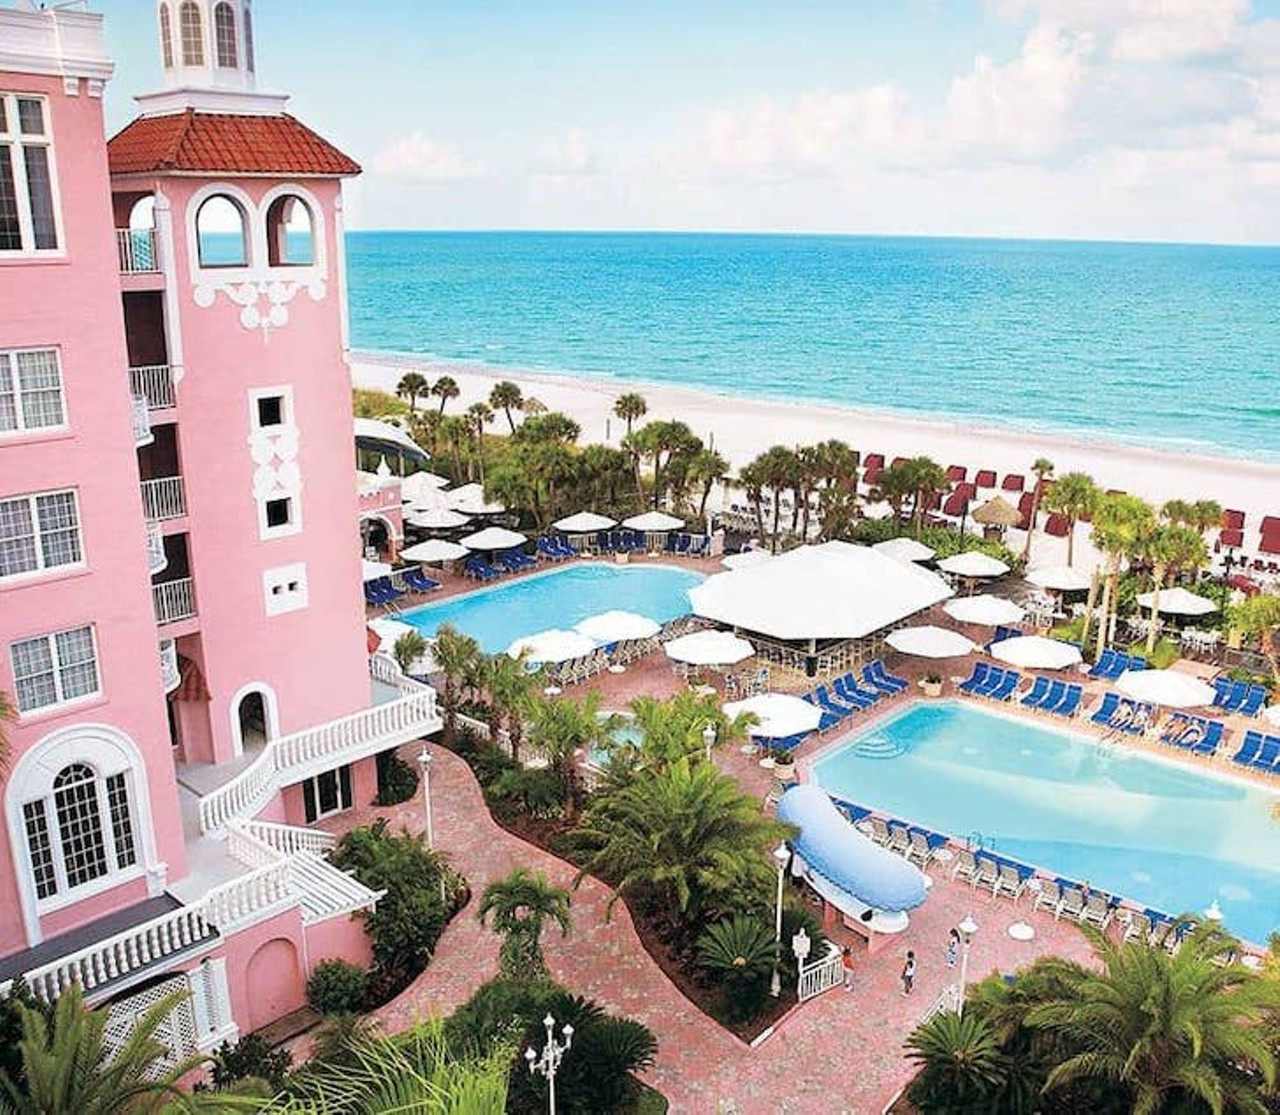 Don CeSar
3400 Gulf Blvd, St Pete Beach, FL
It&#146;s a no brainer that this massive pink palace on St. Pete beach has a beautiful everything, including three bars&#150;&#150;an elegant lobby bar, Rowe Bar, and the beachfront Beachcomber bar. Each of these bars offers a step into the lavish life of the Don CeSar. Grab a cocktail and relax on their private beach.
Photo via doncesar.com